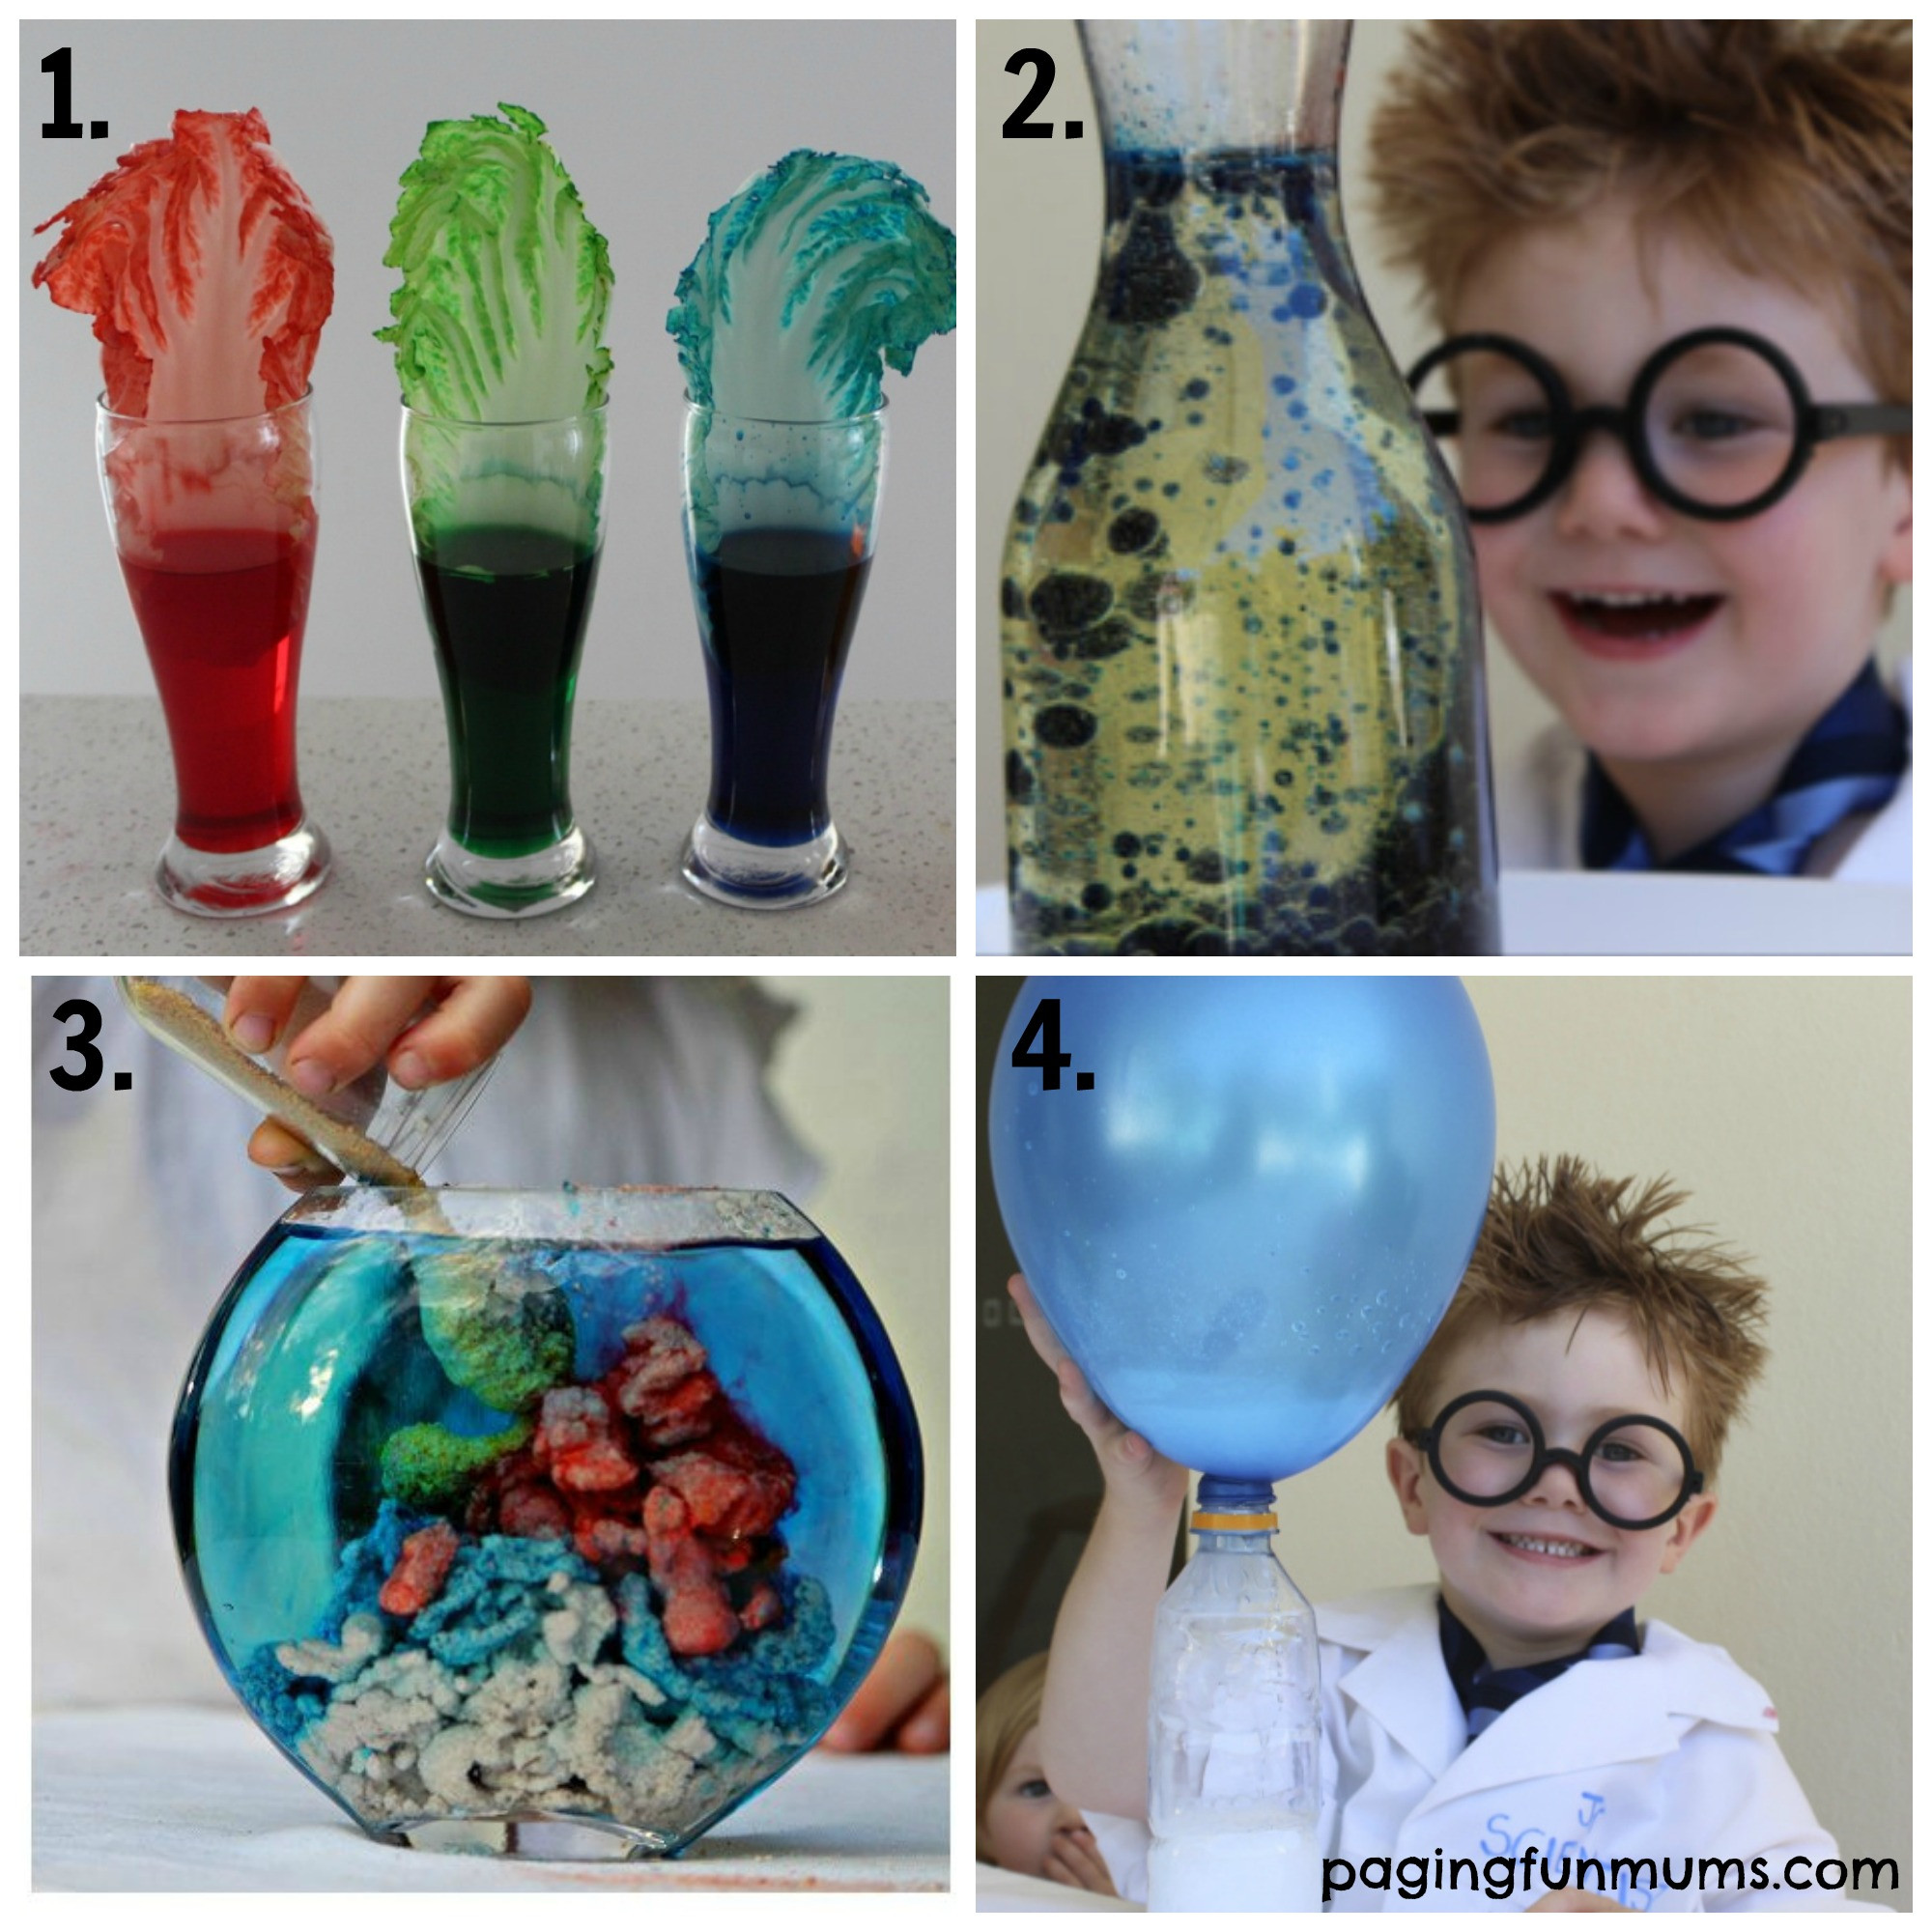 Scientific Crafts For Kids
 21 Fun Science Experiments for Kids 1 4 Paging Fun Mums